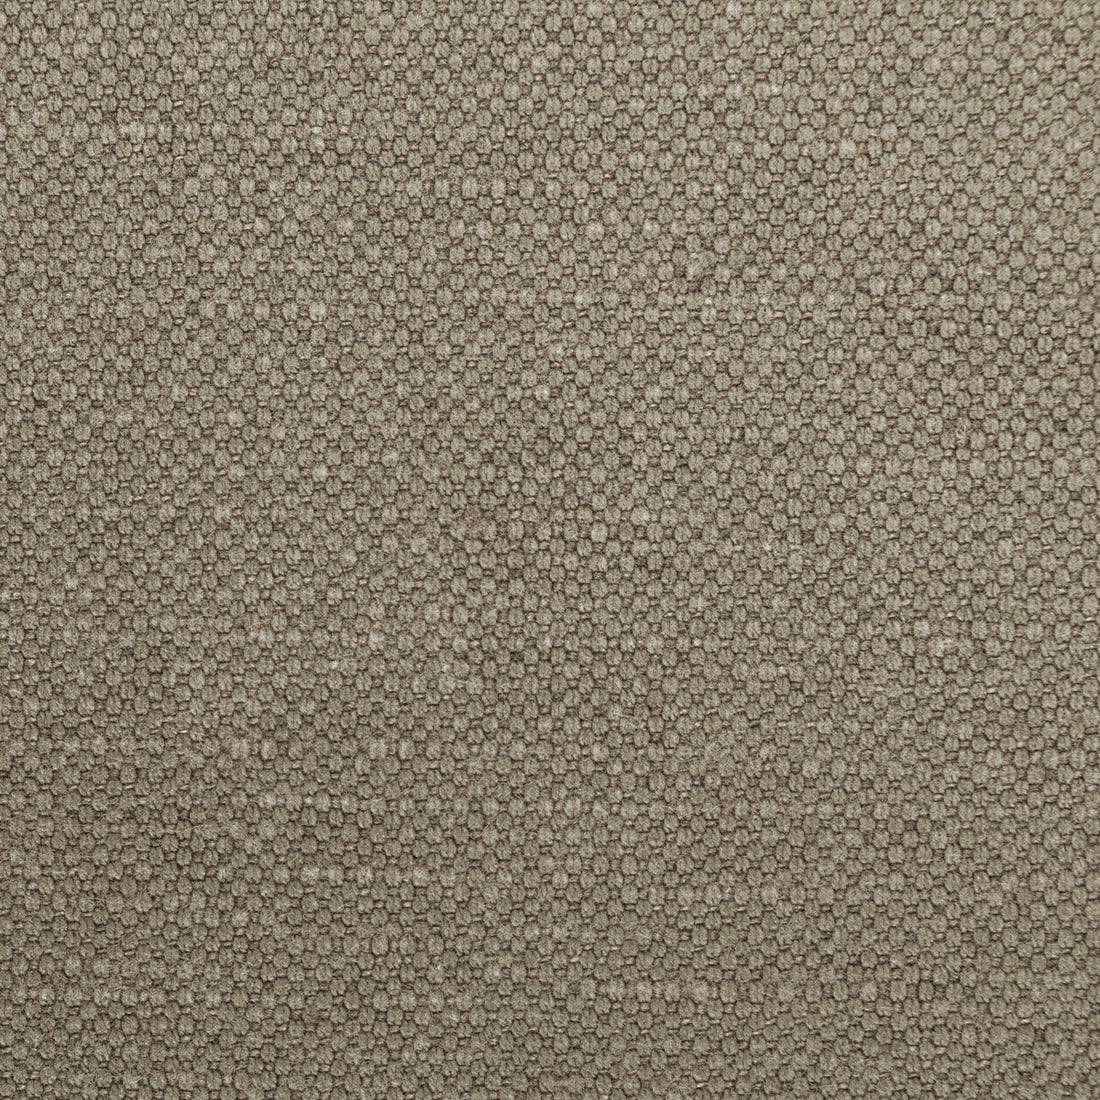 Carson fabric in steam color - pattern 36282.1621.0 - by Kravet Basics